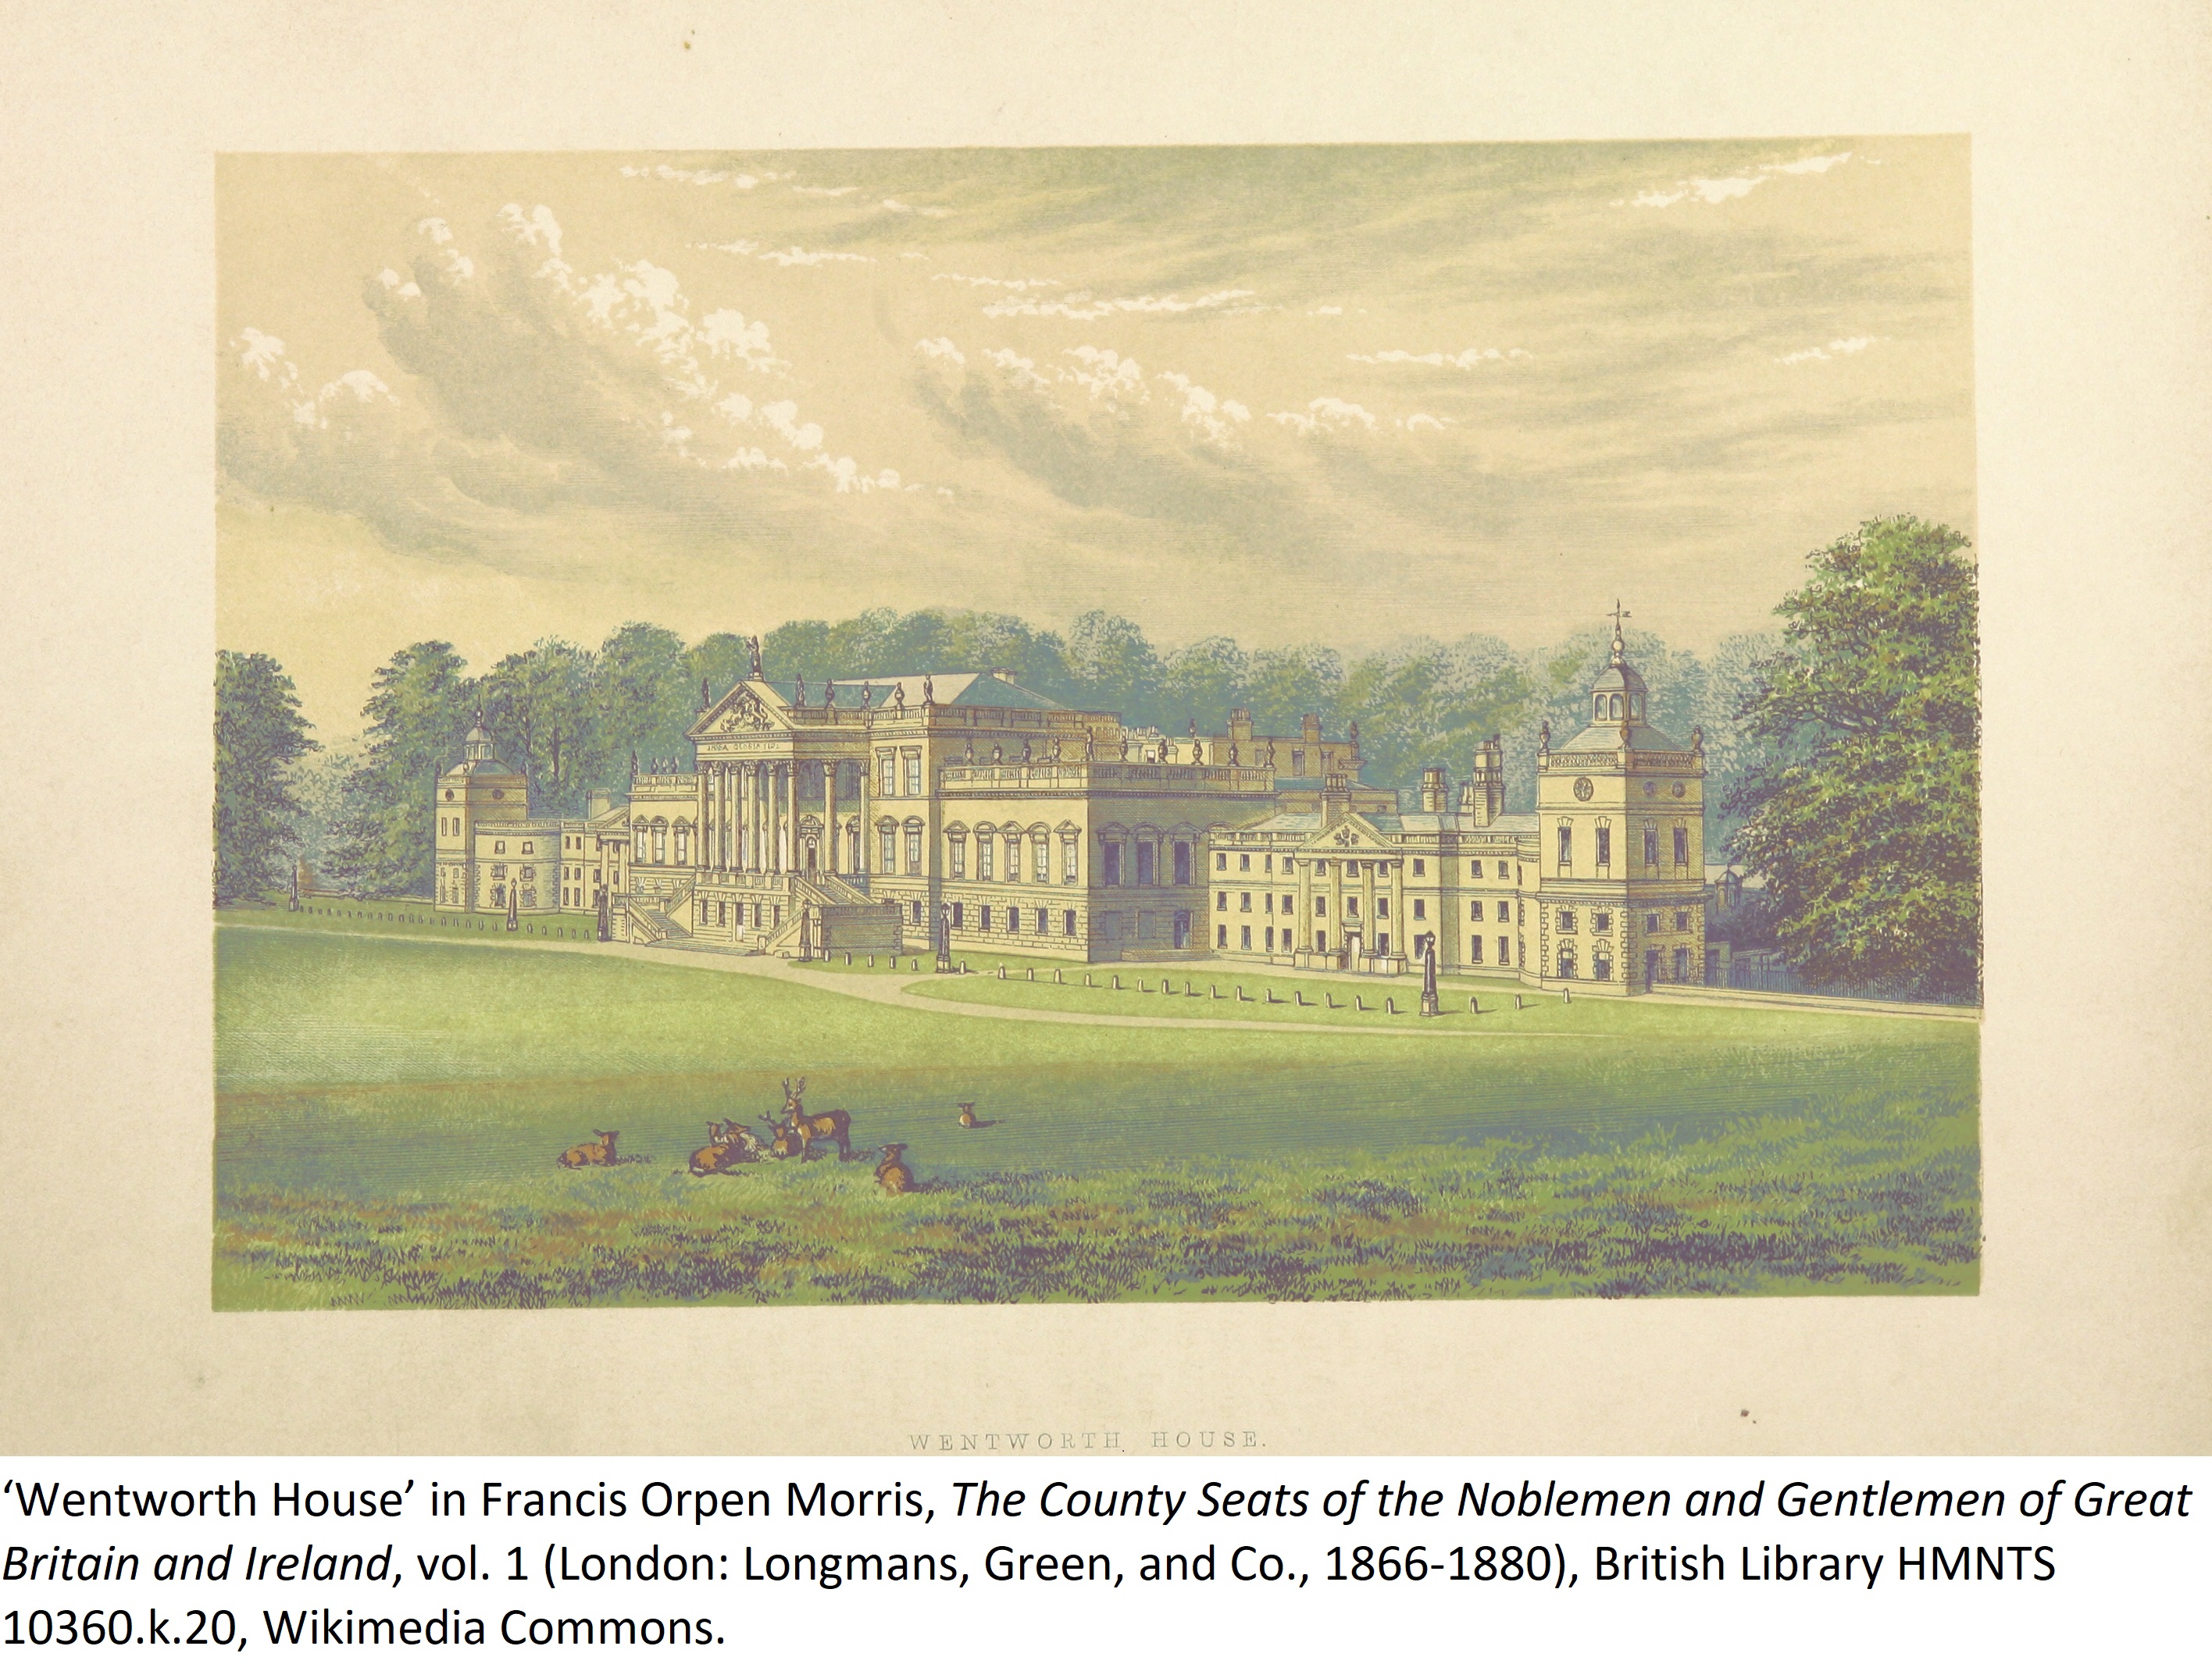 ‘Wentworth House’ in Francis Orpen Morris, The County Seats of the Noblemen and Gentlemen of Great Britain and Ireland, vol. 1 (London: Longmans, Green, and Co., 1866-1880), British Library HMNTS 10360.k.20, Wikimedia Commons.